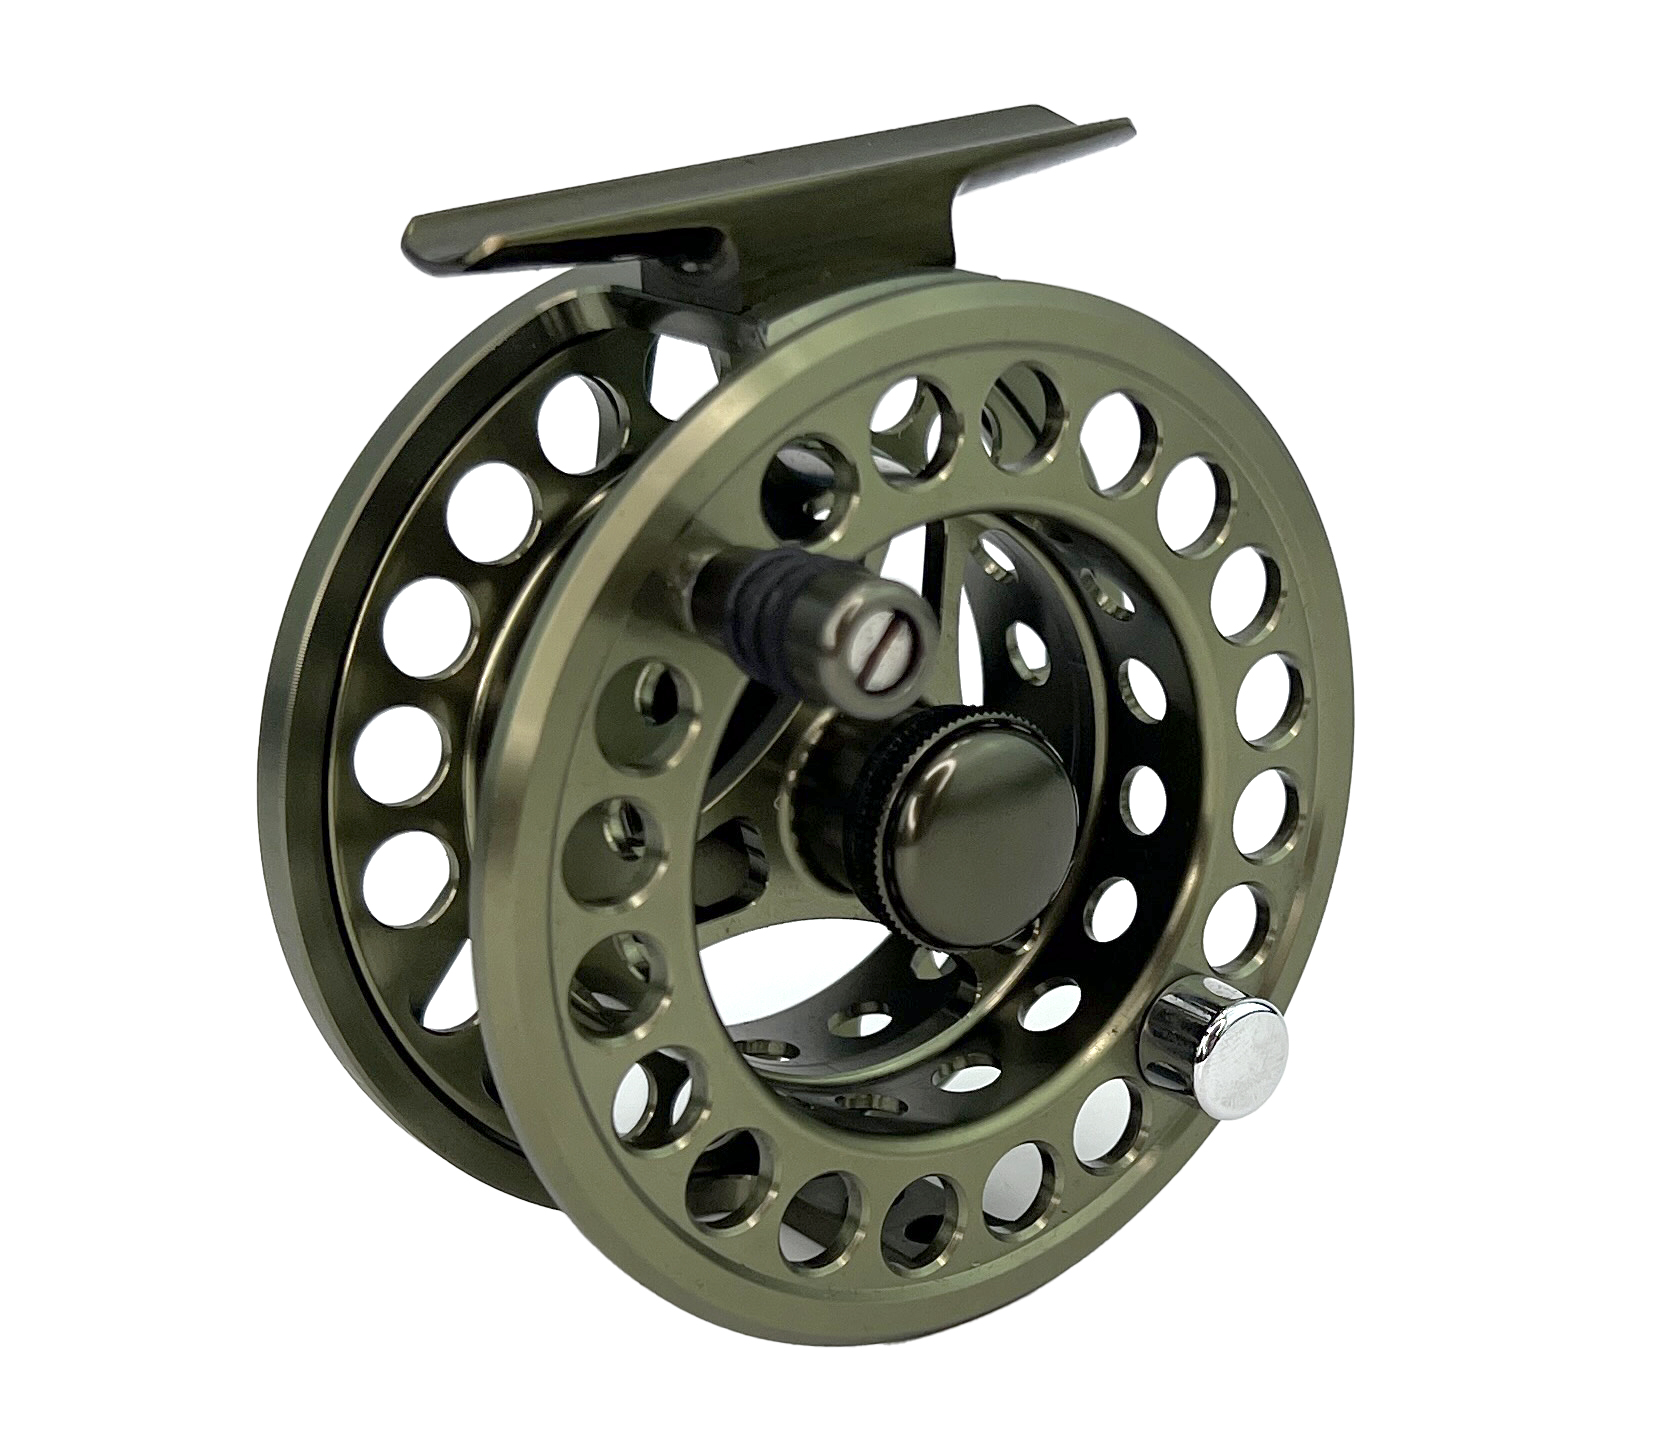 Stillwater PL-C Trout Fly Reel & Spool Combos – Glasgow Angling Centre